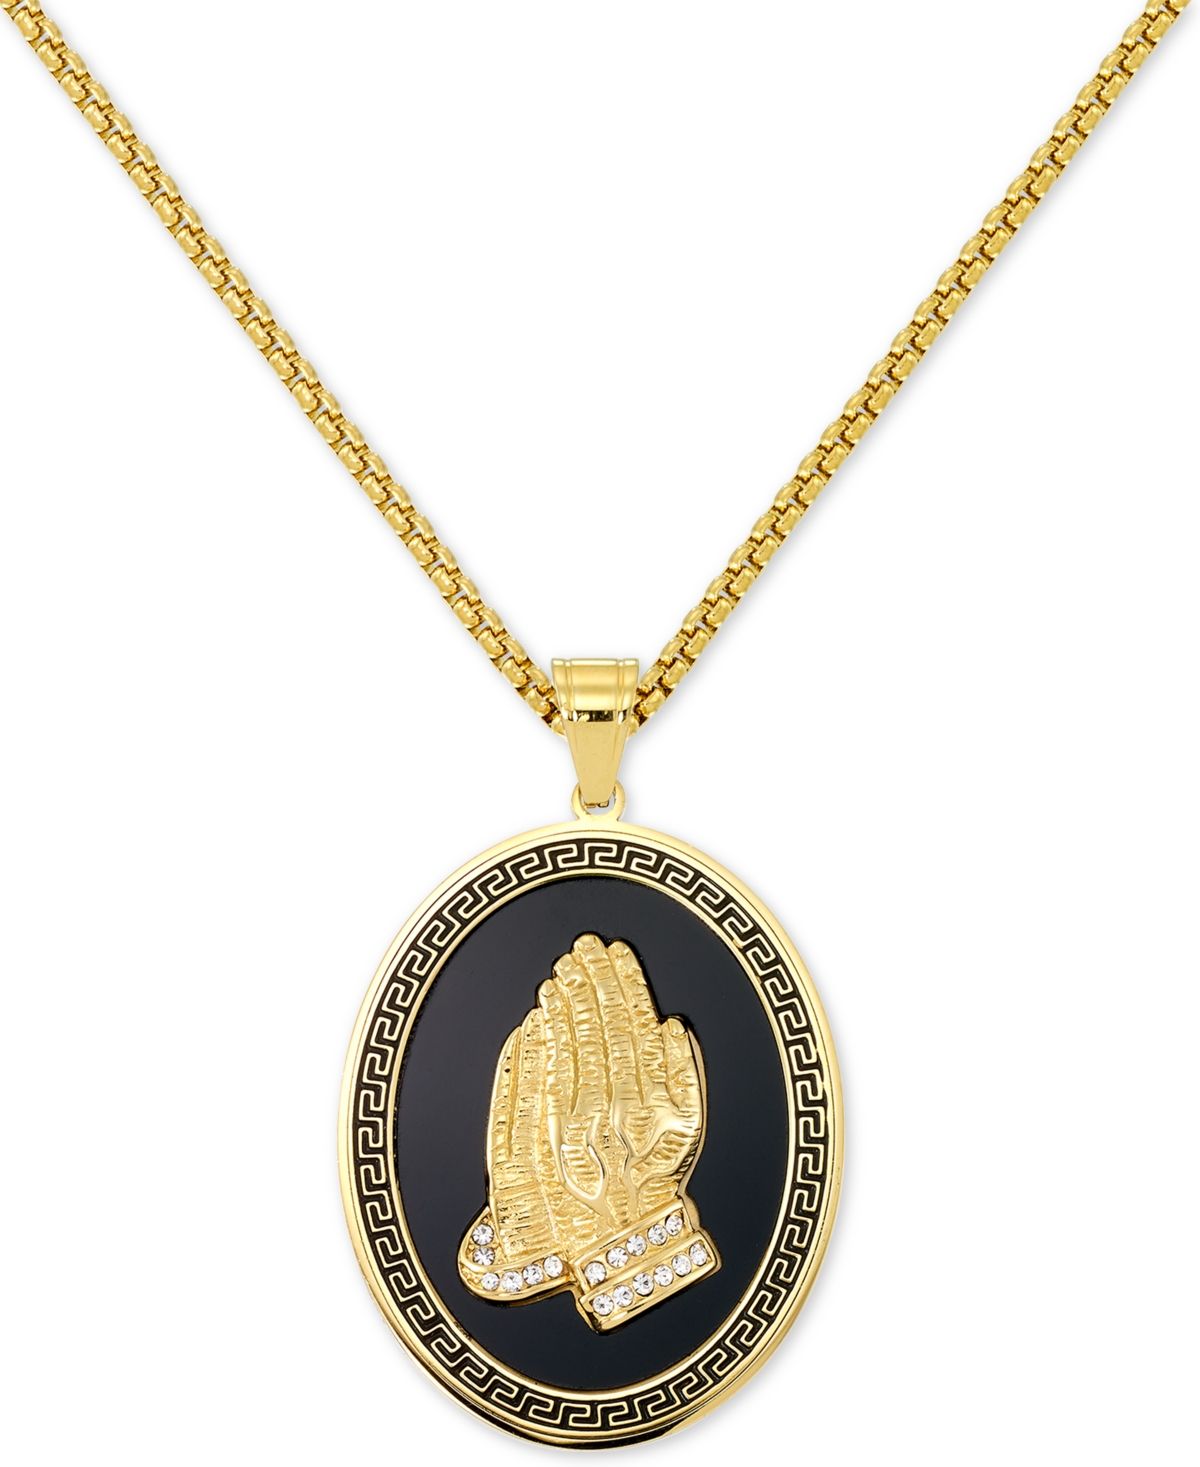 Smith Men's Praying Hands 24" Pendant Necklace in Black Enamel & Yellow Ion-Plated Stainless Steel - Gold Tone